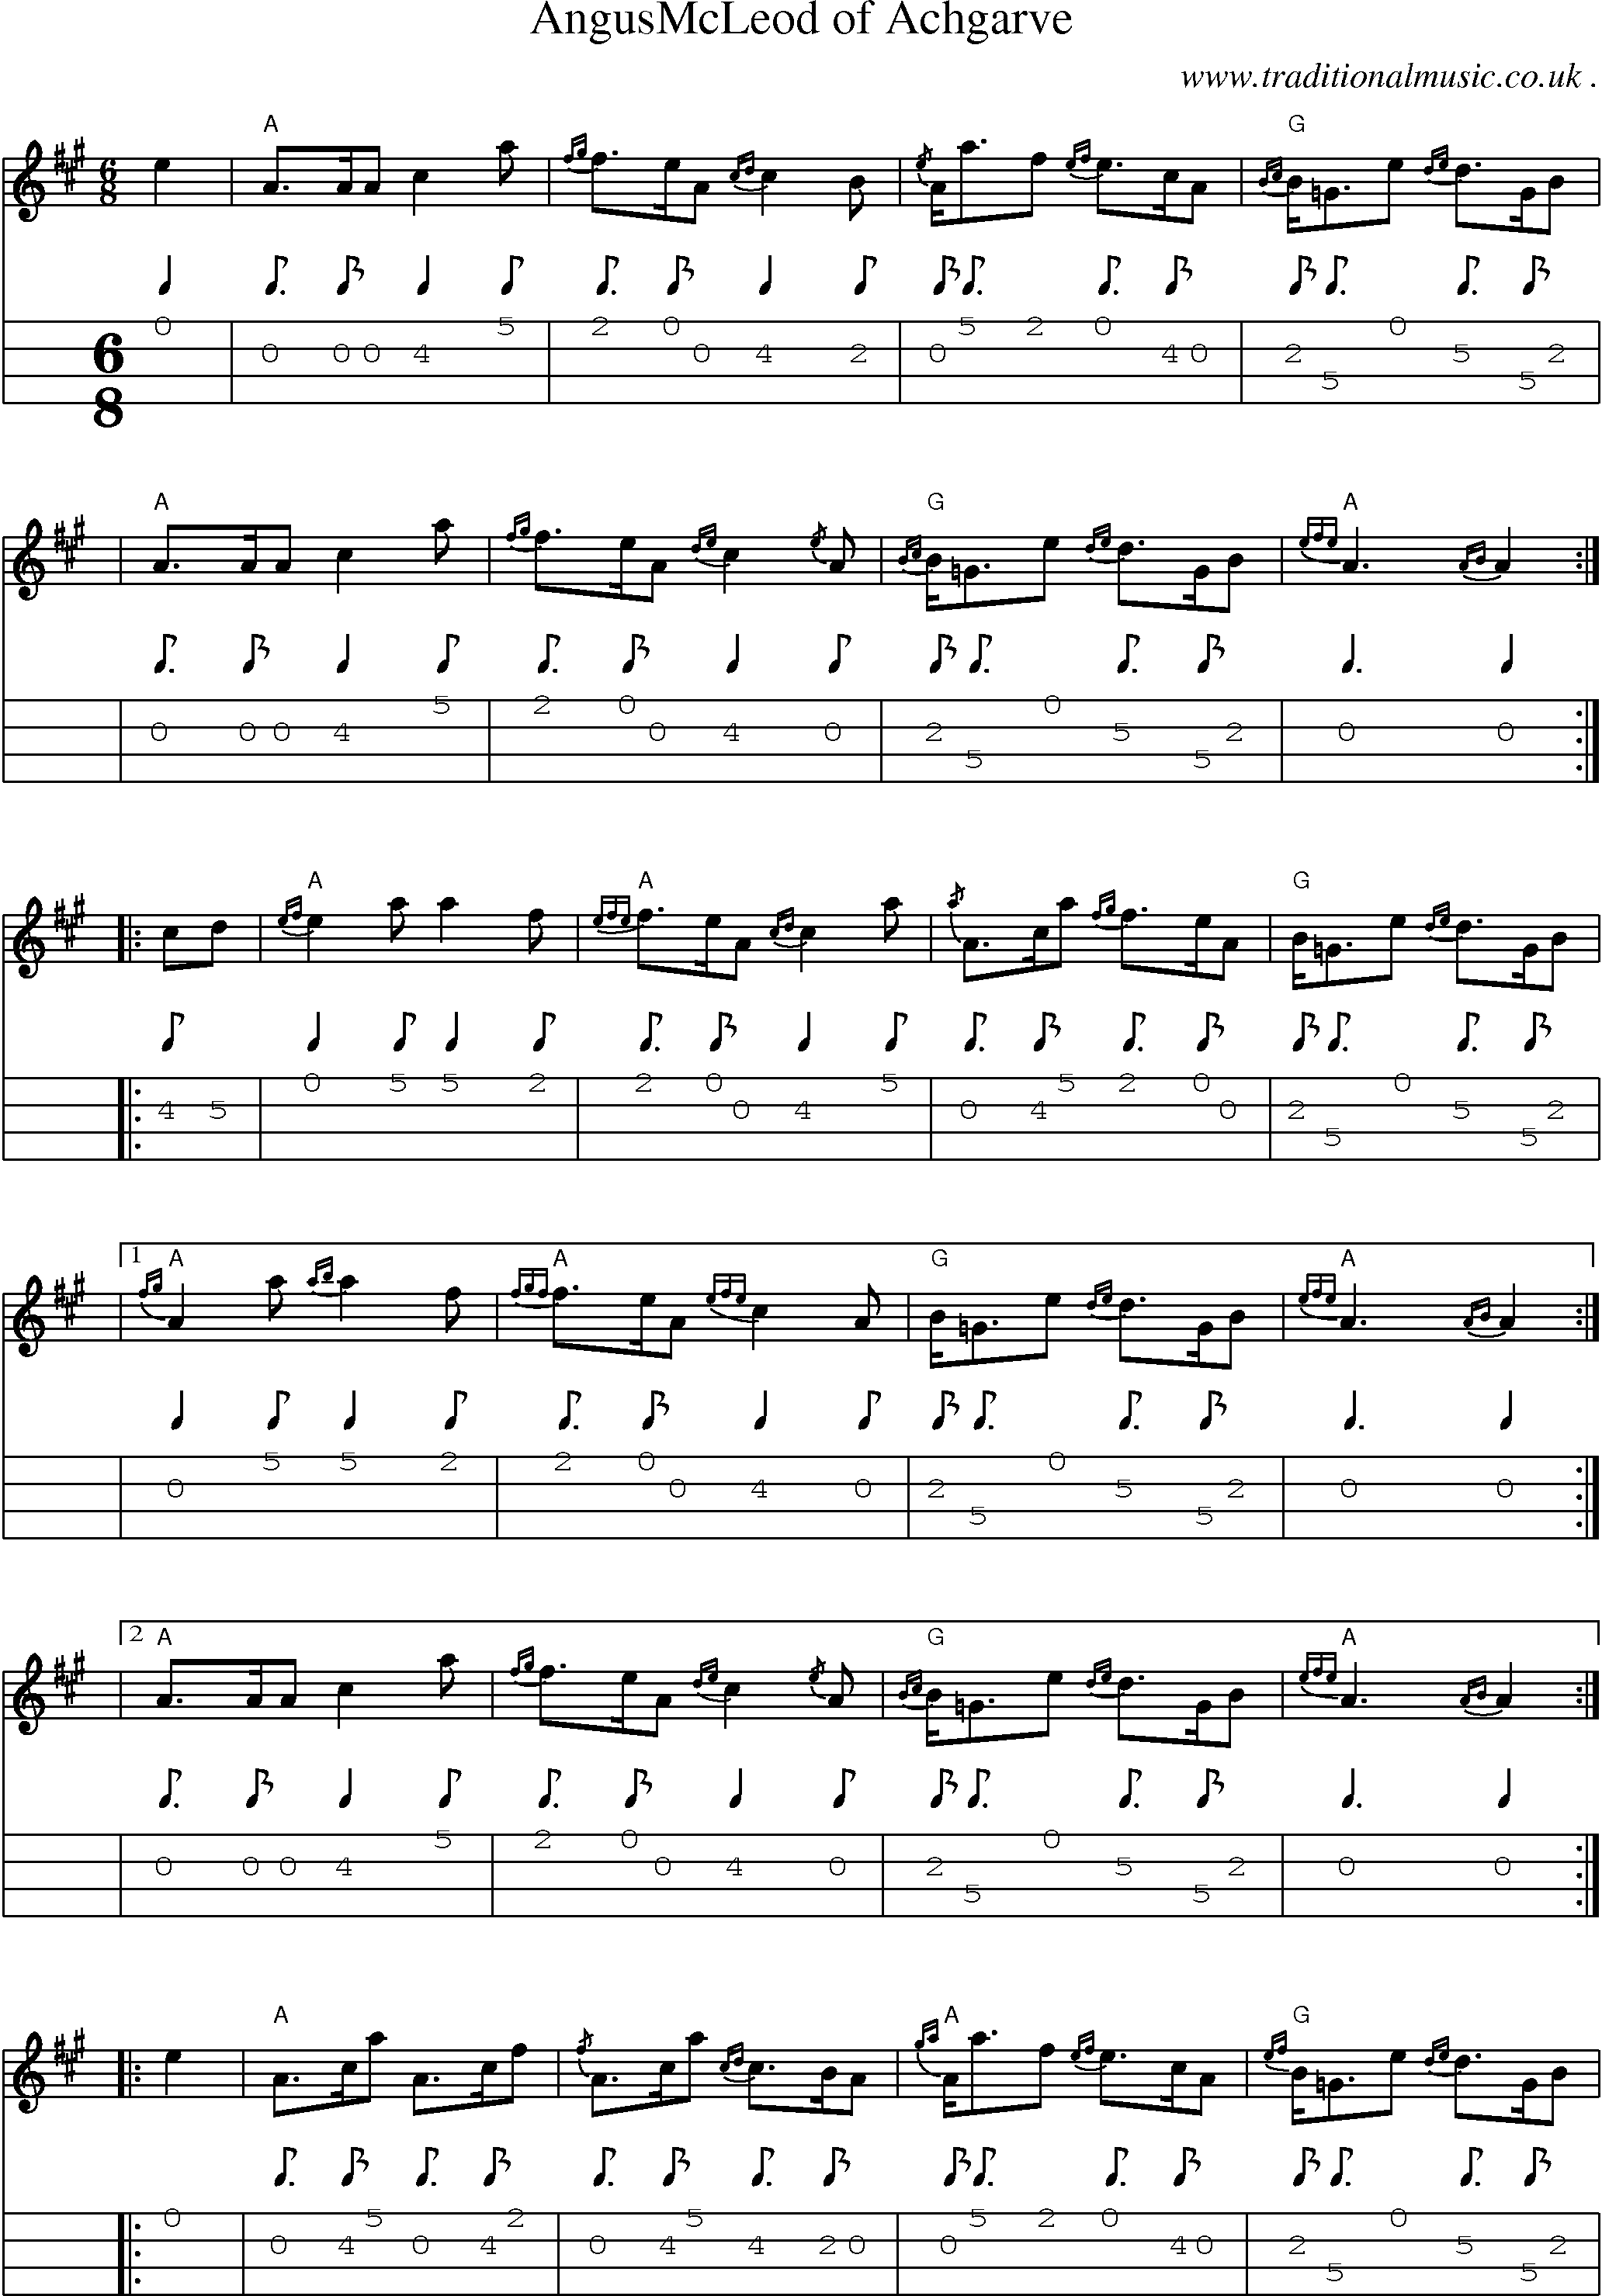 Sheet-music  score, Chords and Mandolin Tabs for Angusmcleod Of Achgarve